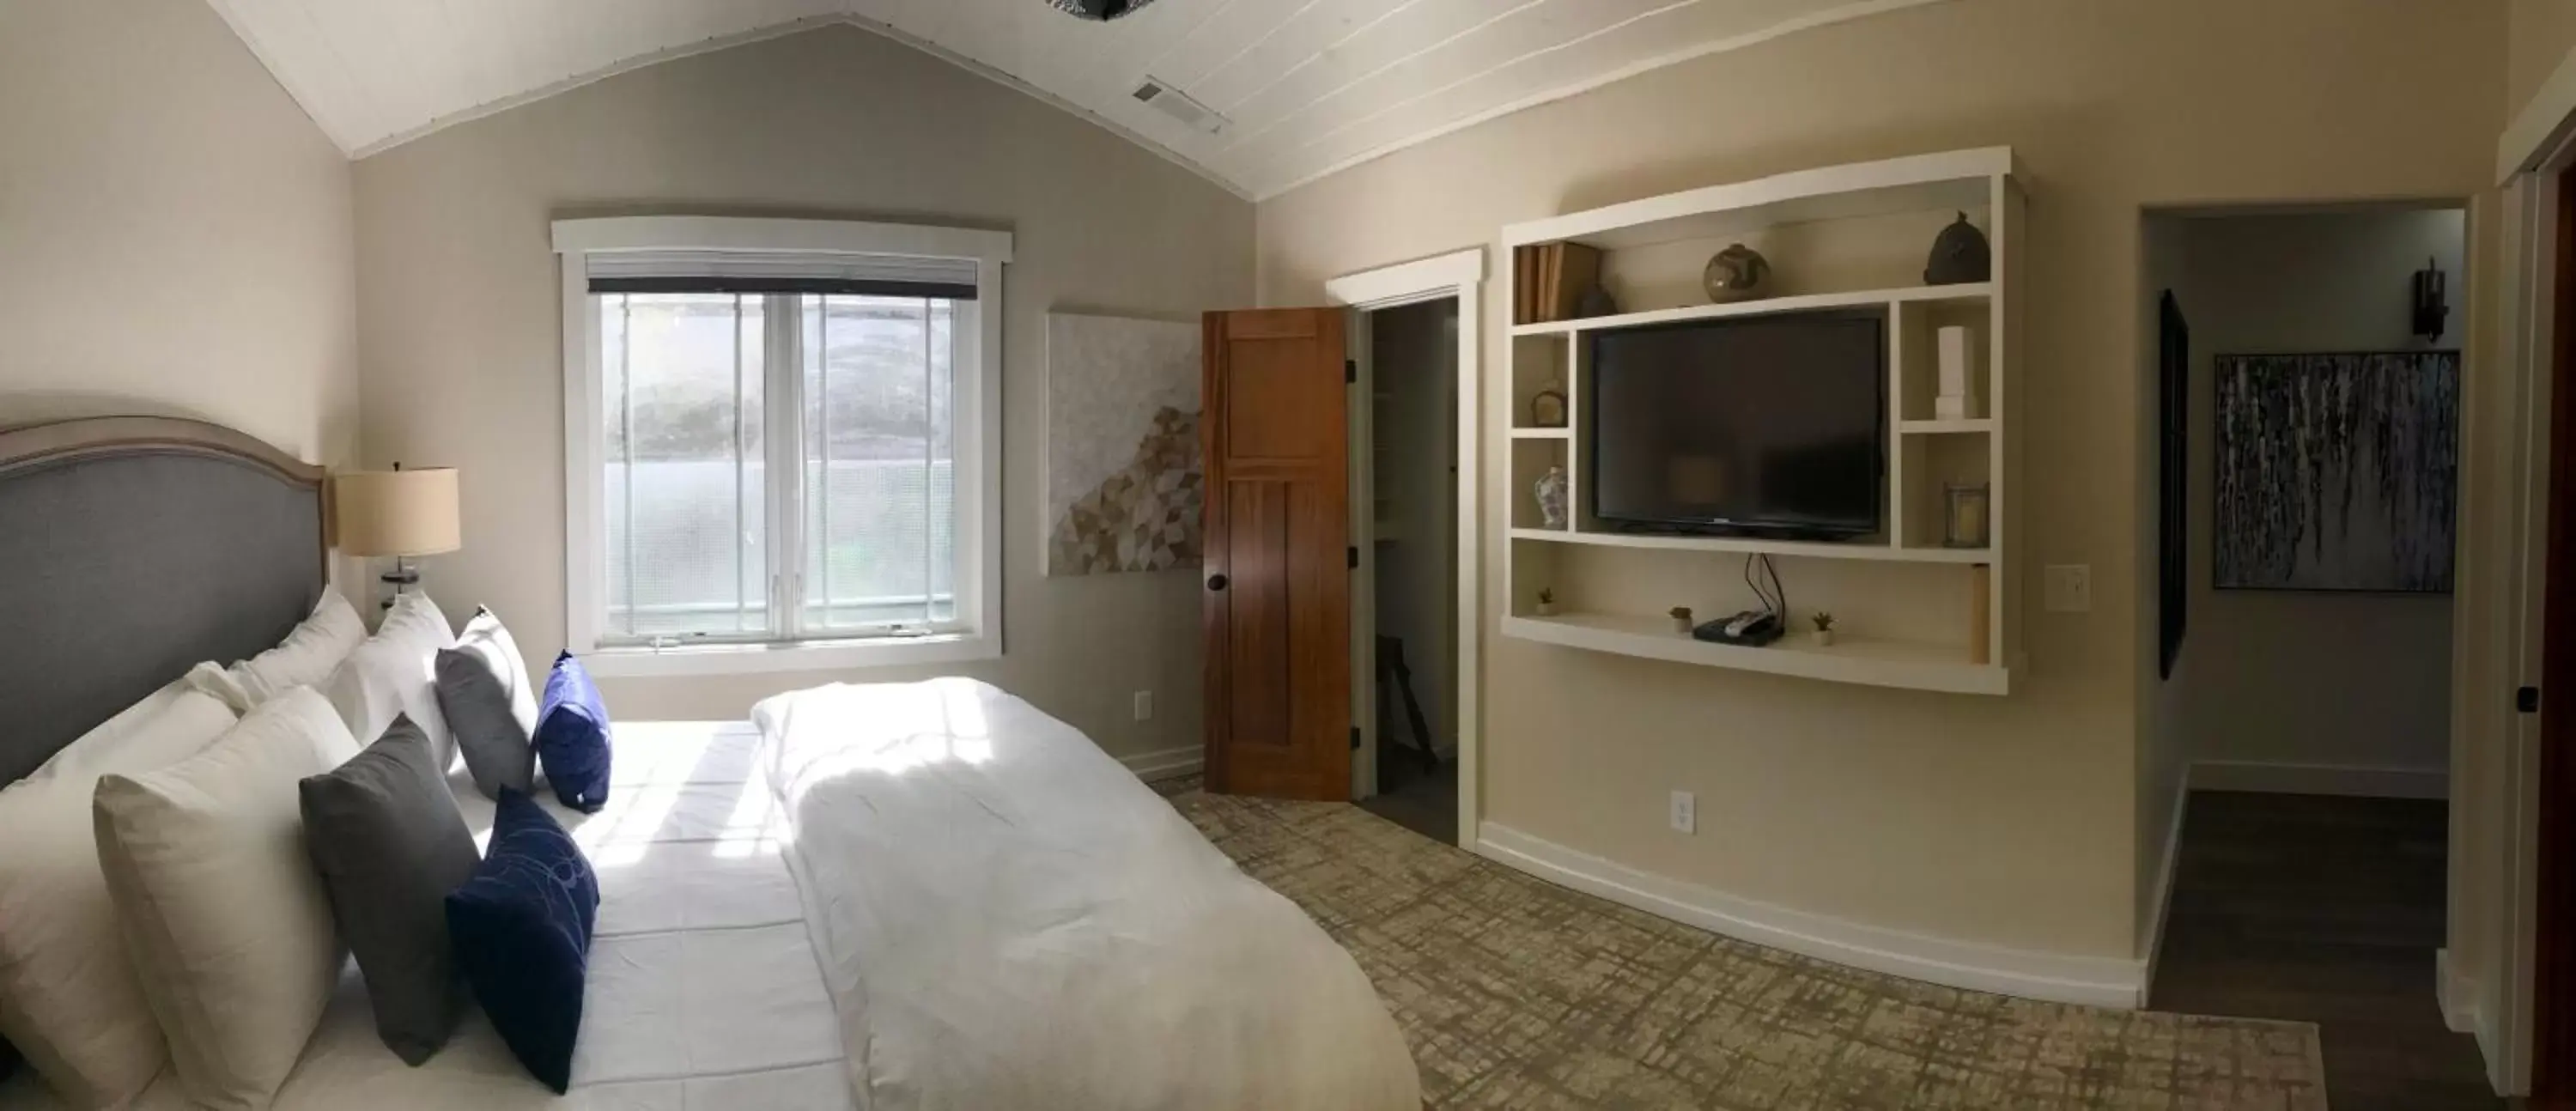 Bedroom, TV/Entertainment Center in The Grand Idyllwild Lodge